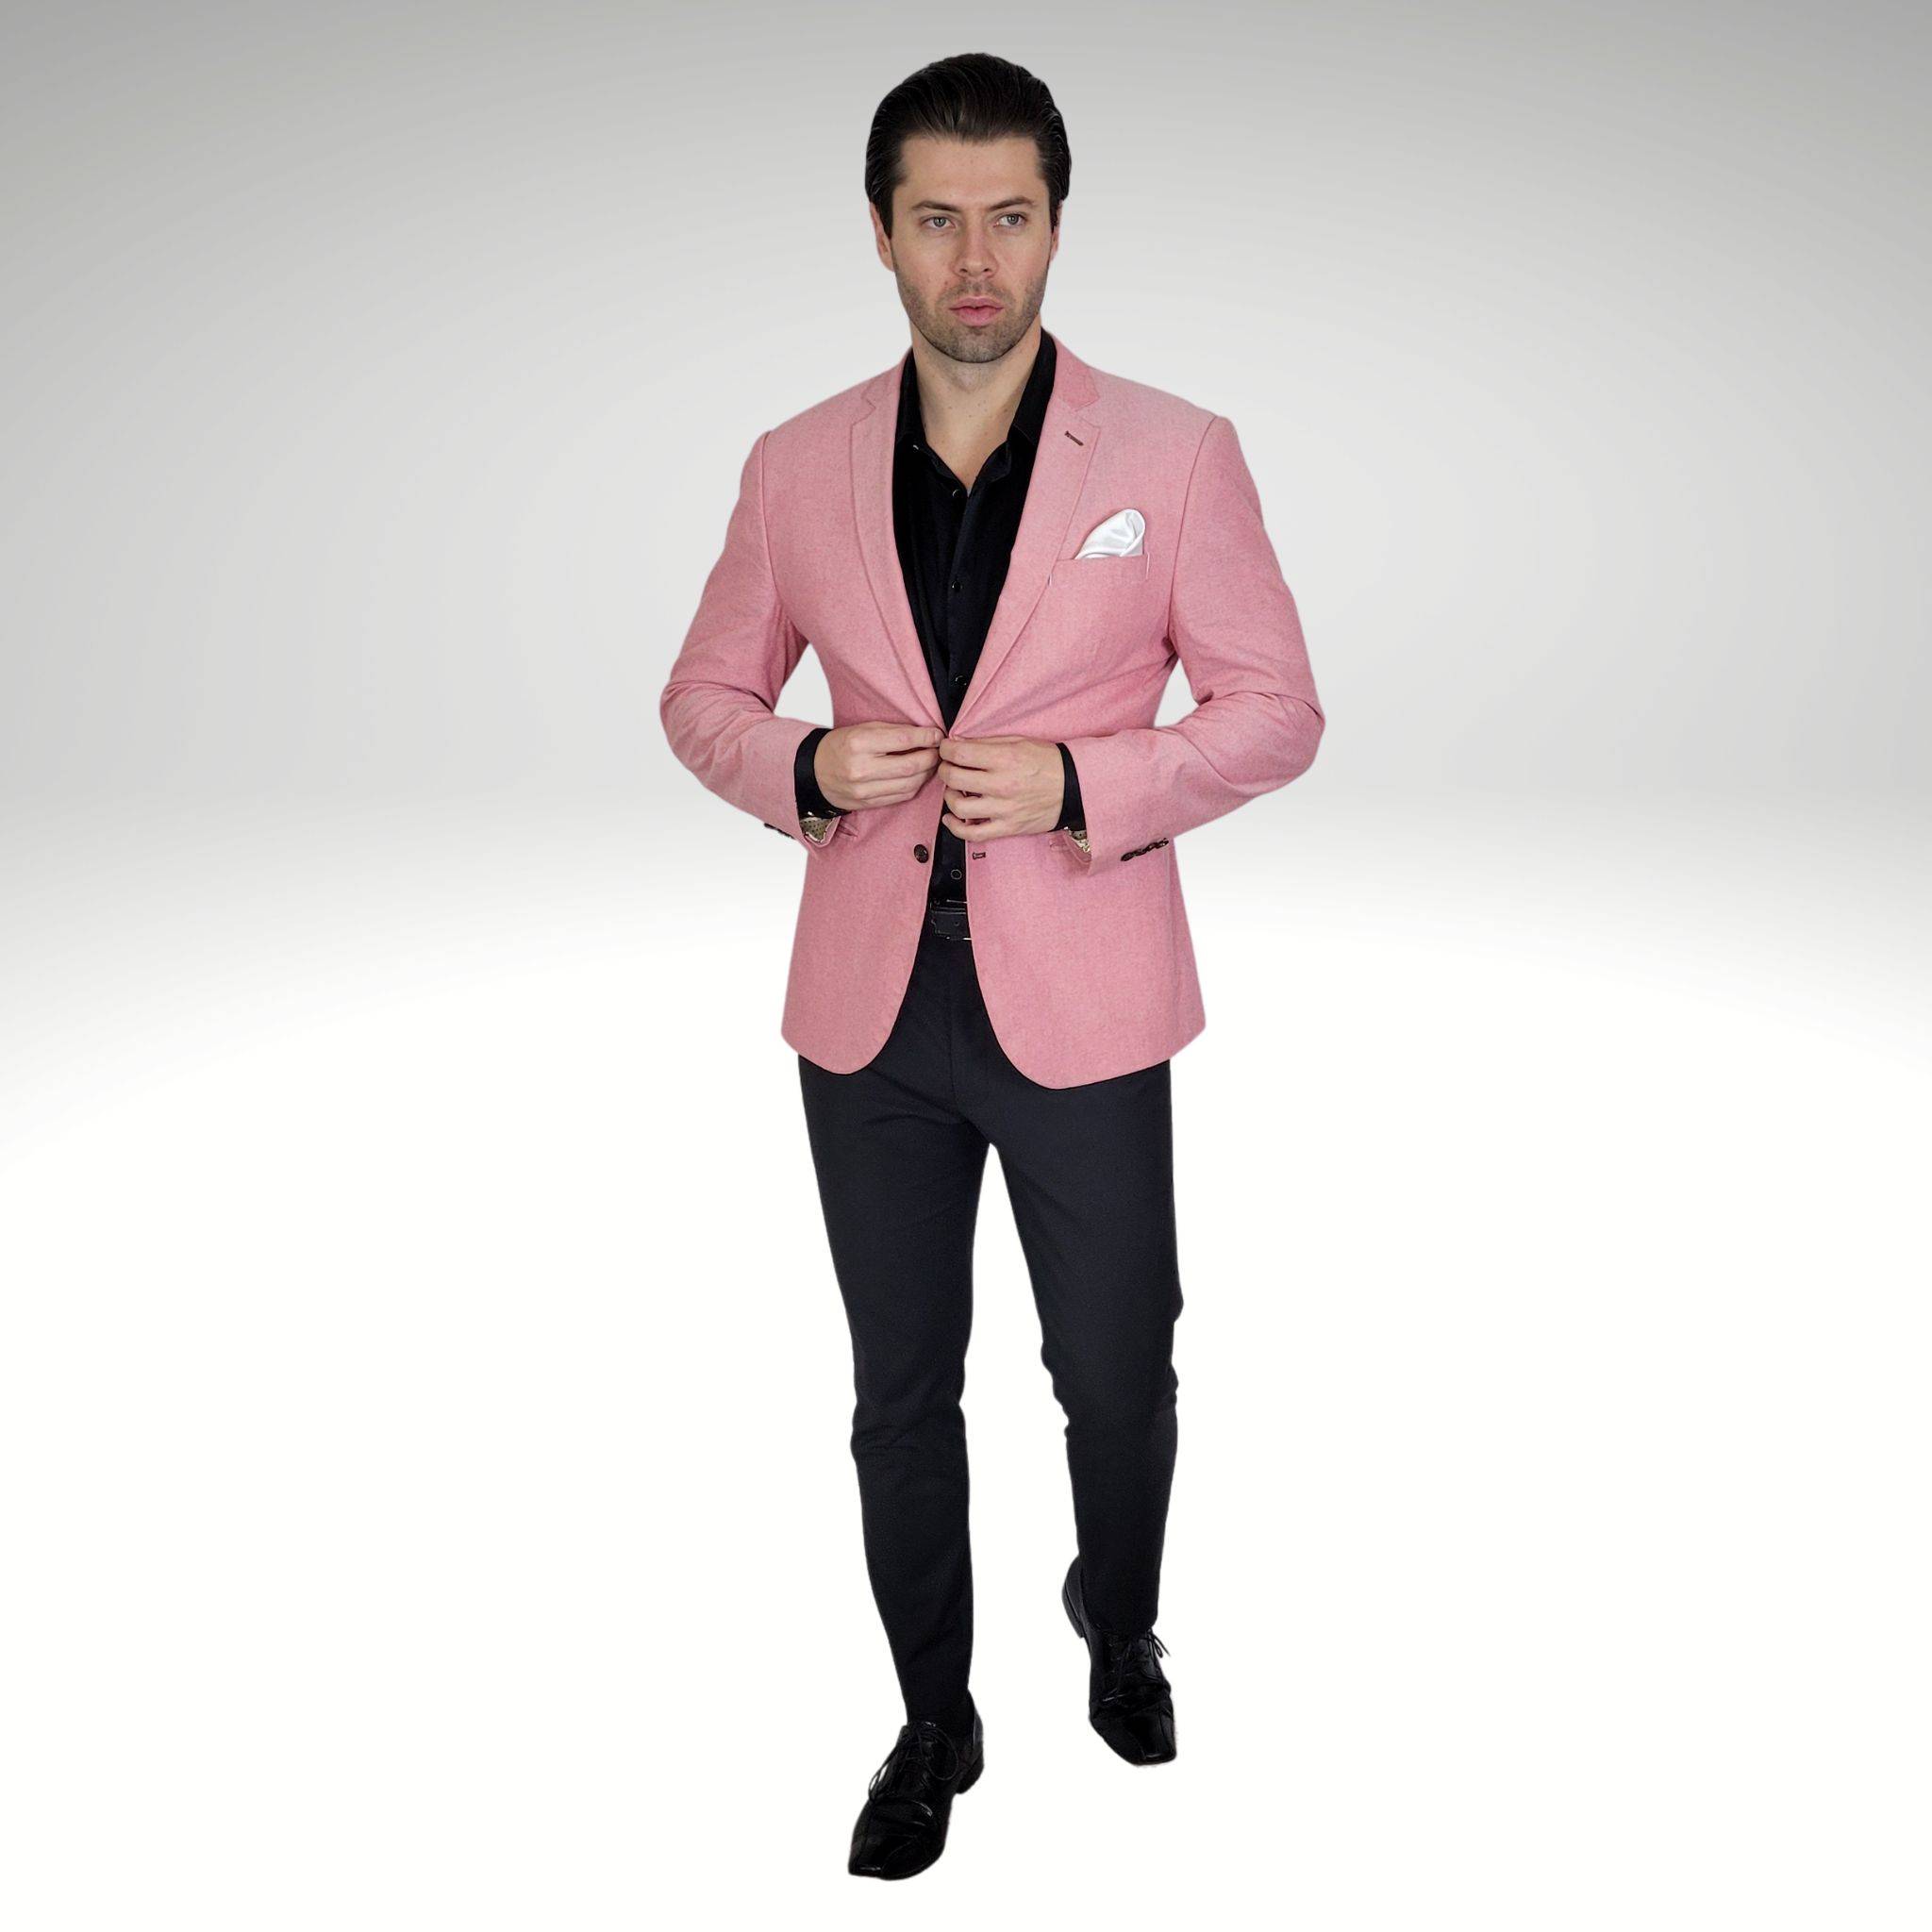 model wearing a black silk shirt underneath a light pink blazer with black pants and black dress shoes